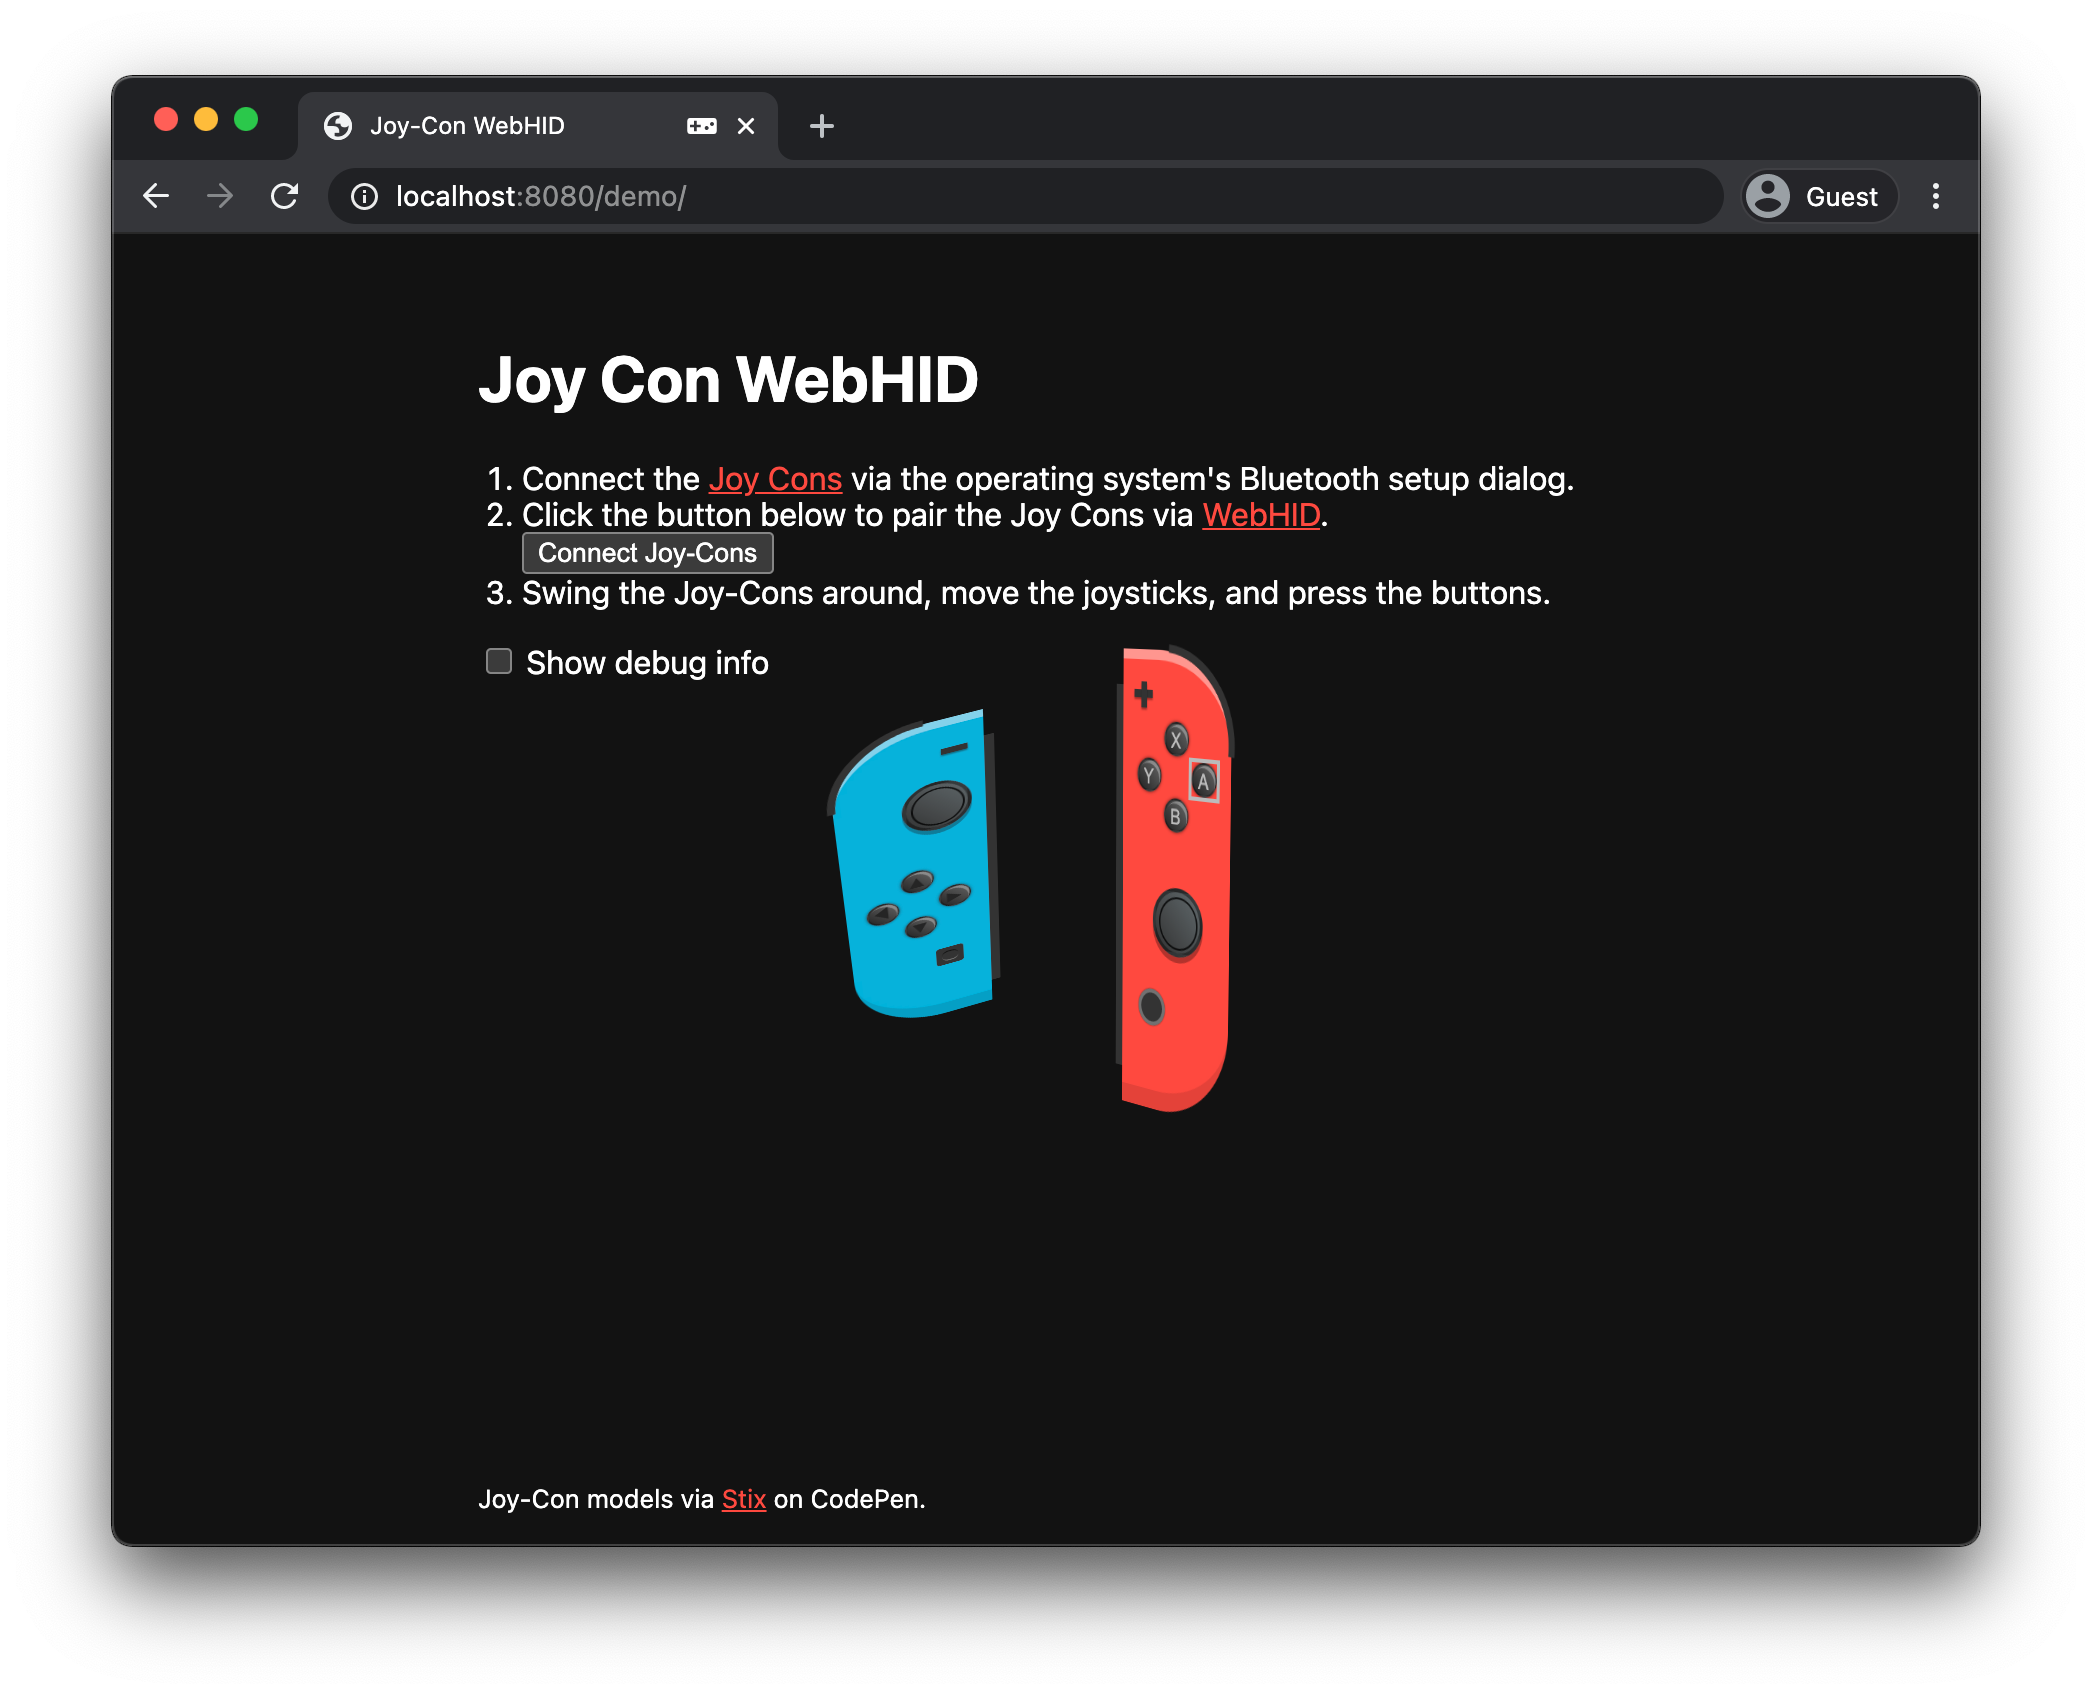 Joy-Con WebHID demo showing two Joy-Cons slightly tilted with one of the analog sticks moved to the right on one Joy-Con and the 'A' button pressed on the other.